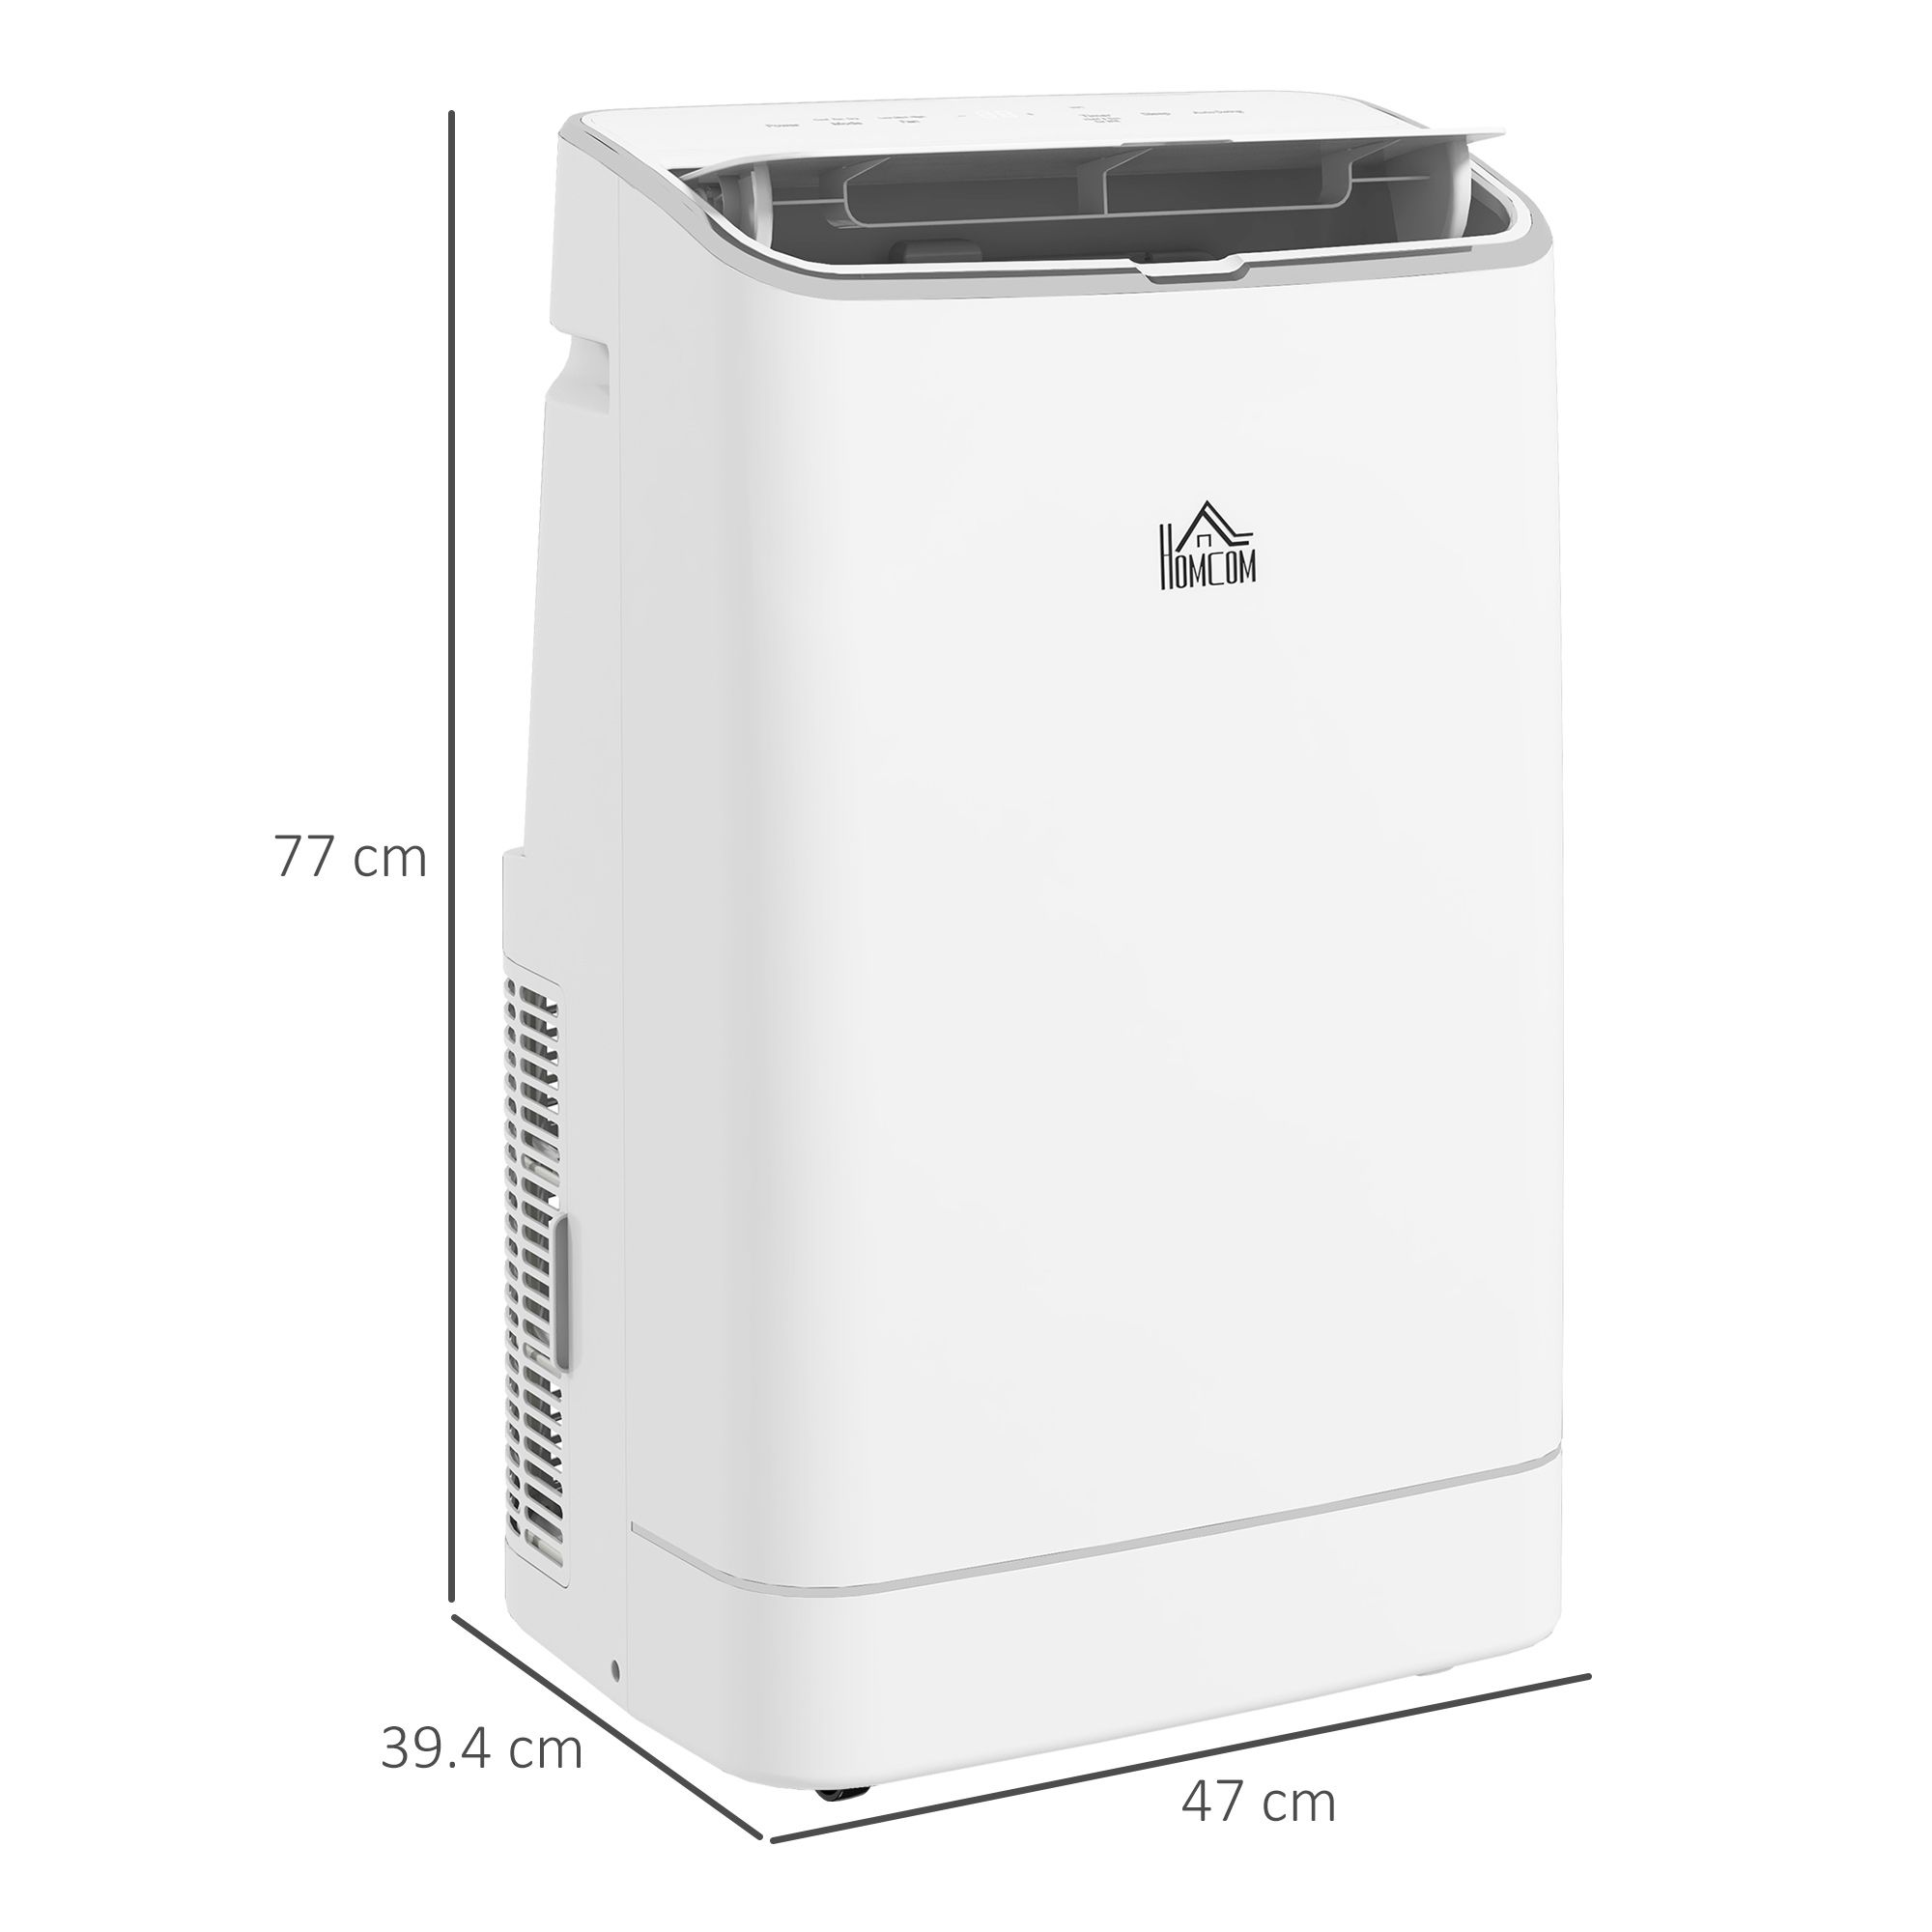 Homcom 14,000 Btu Mobile Air Conditioner, Smart Home Wifi Compatible, With Heater, Cooler, Dehumidifier, Fan, 24h Timer